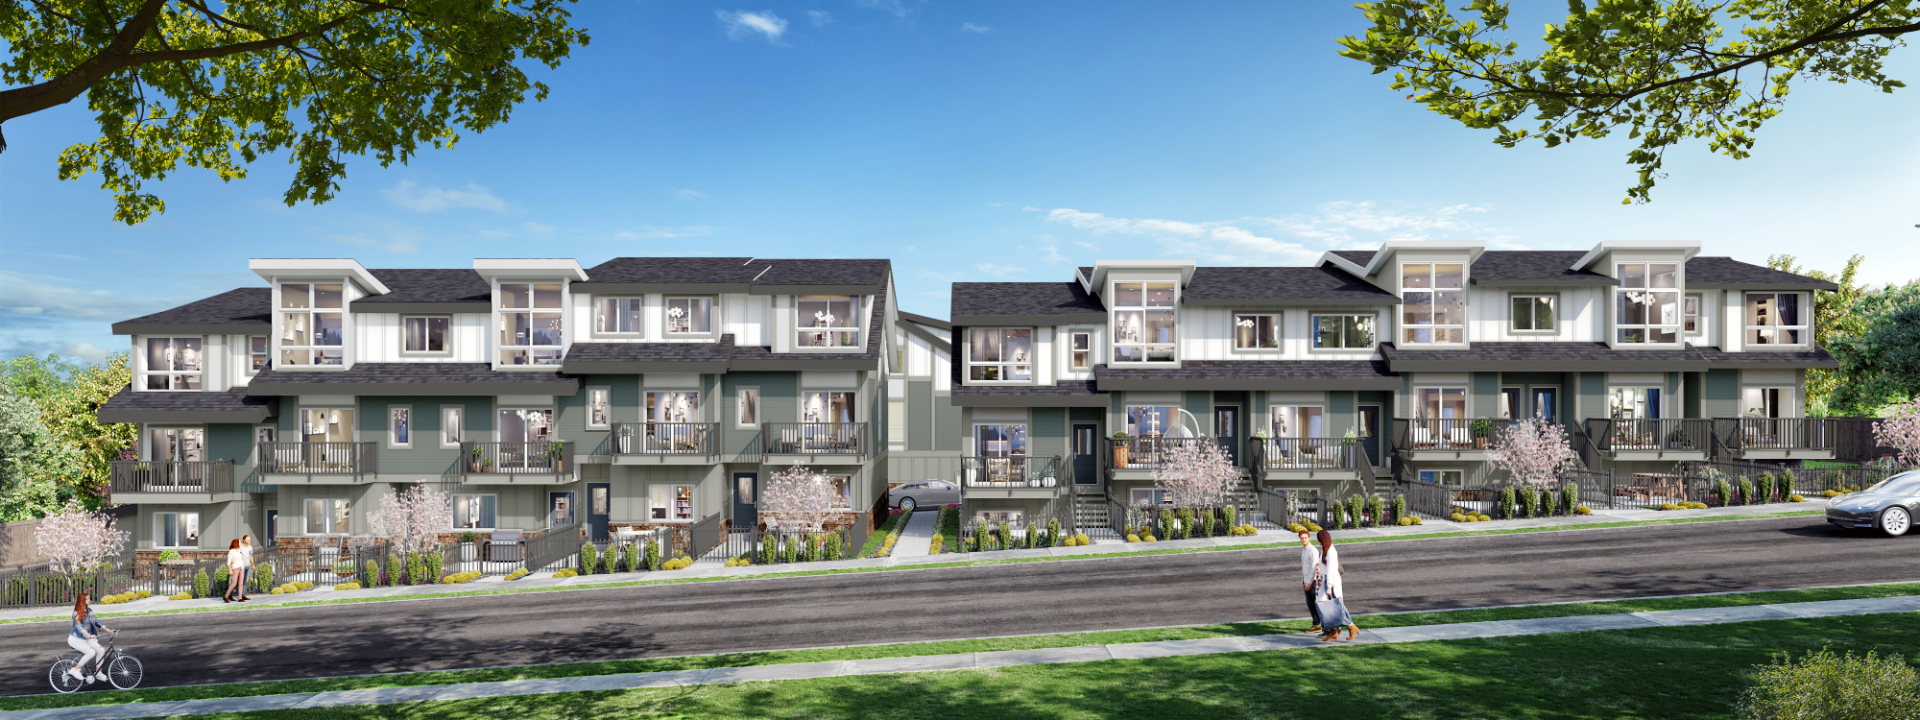 Havenwood at Sullivan by Apcon Group – 29 Superior Surrey Townhomes